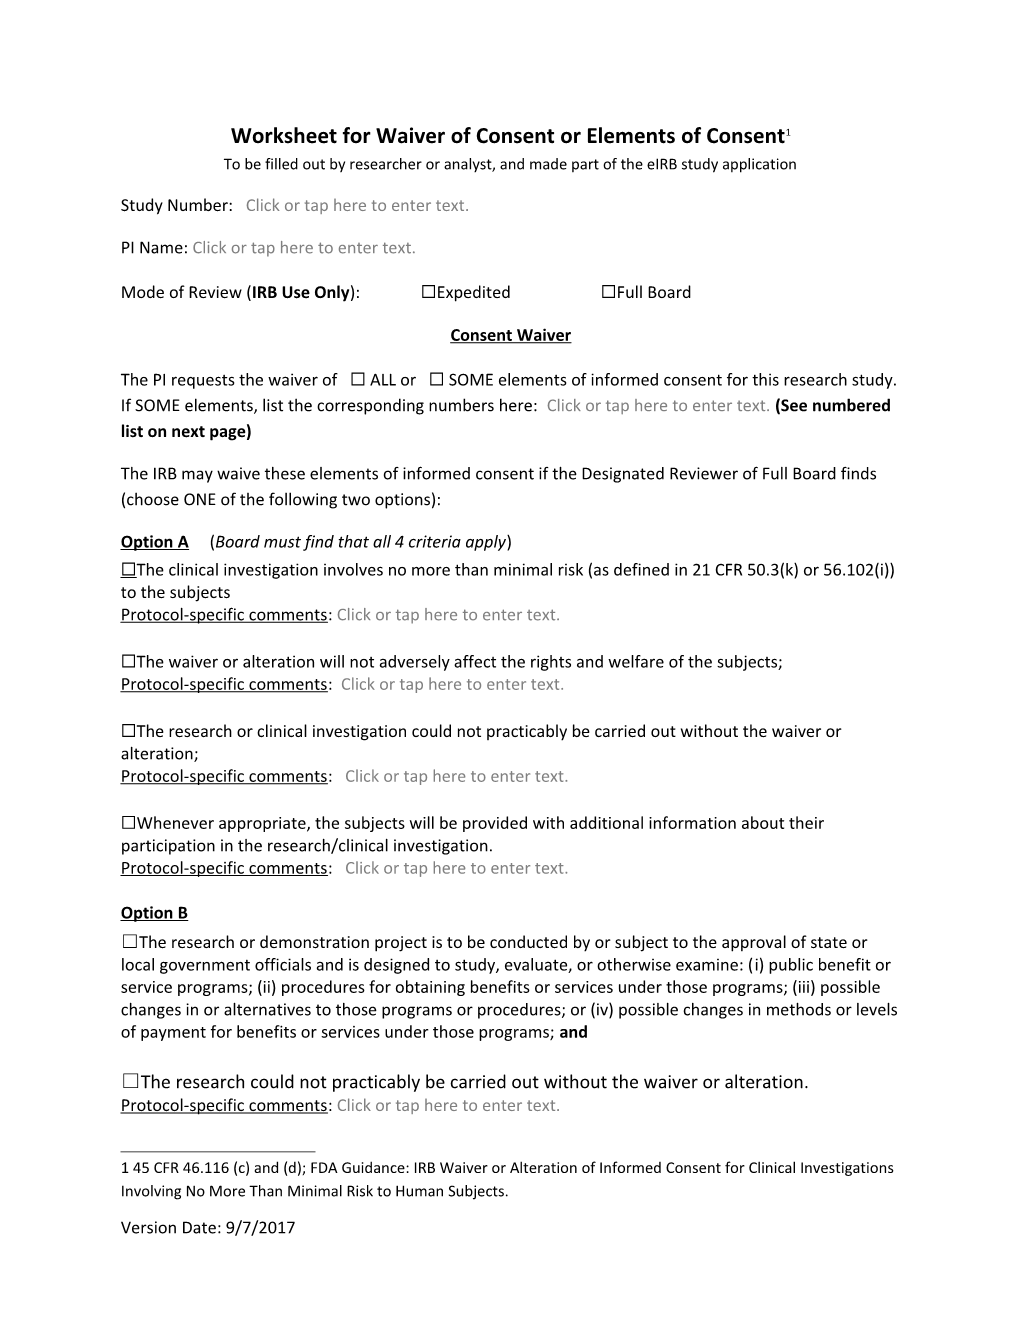 Worksheet for Waiver of Consent Or Elements of Consent 1